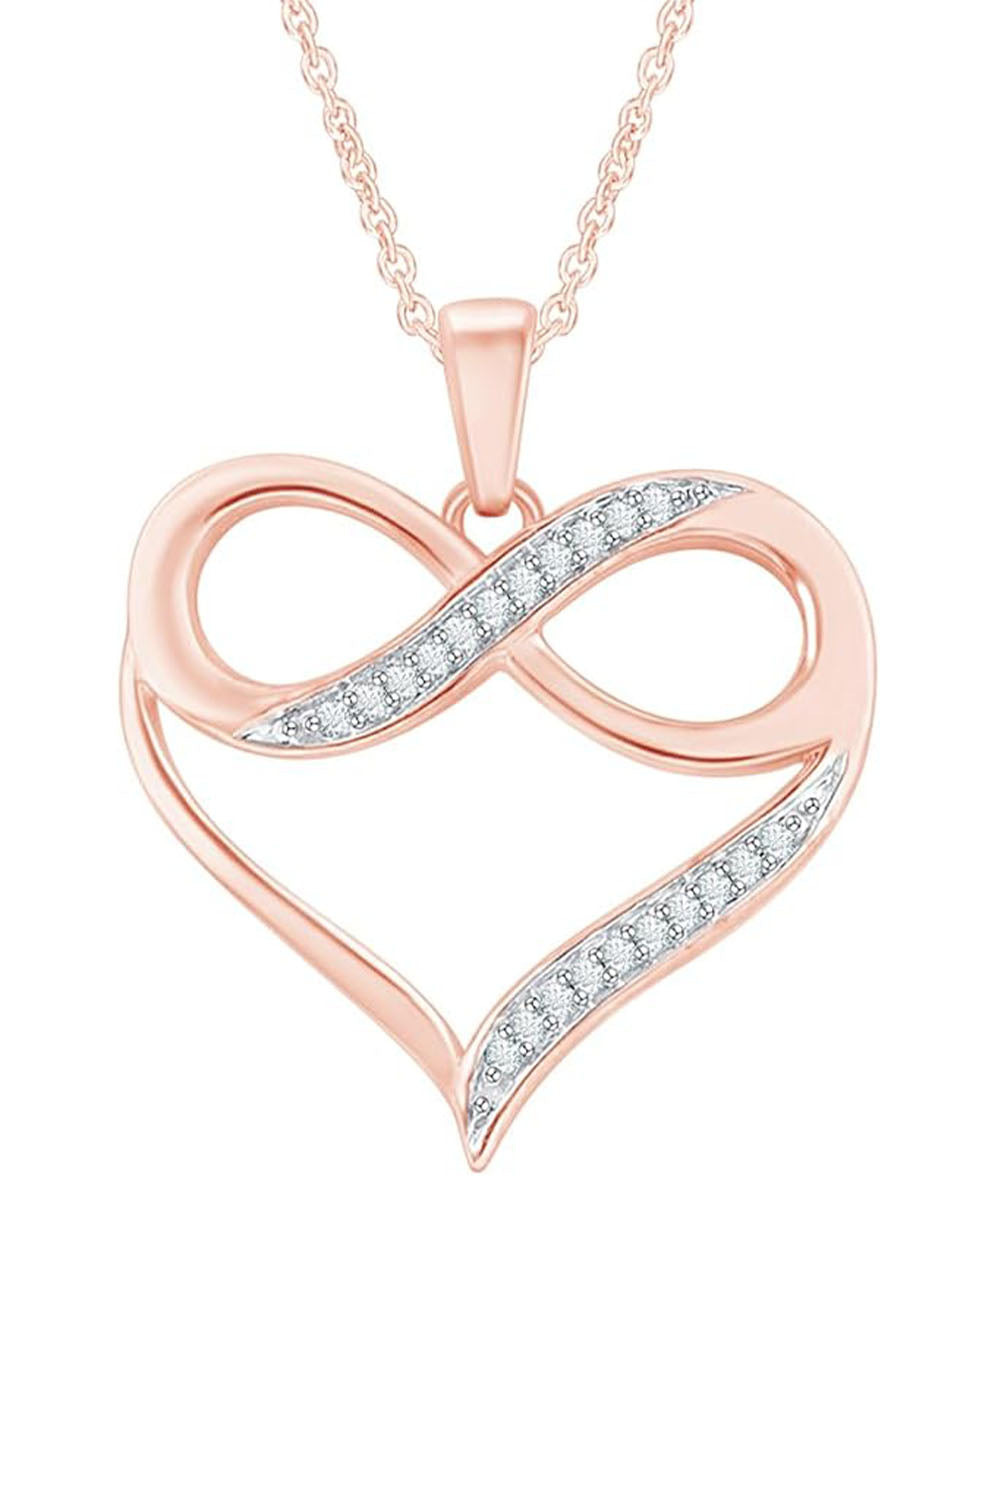 Rose Gold Color Heart with Infinity Pendant Necklace, Infinity Necklace